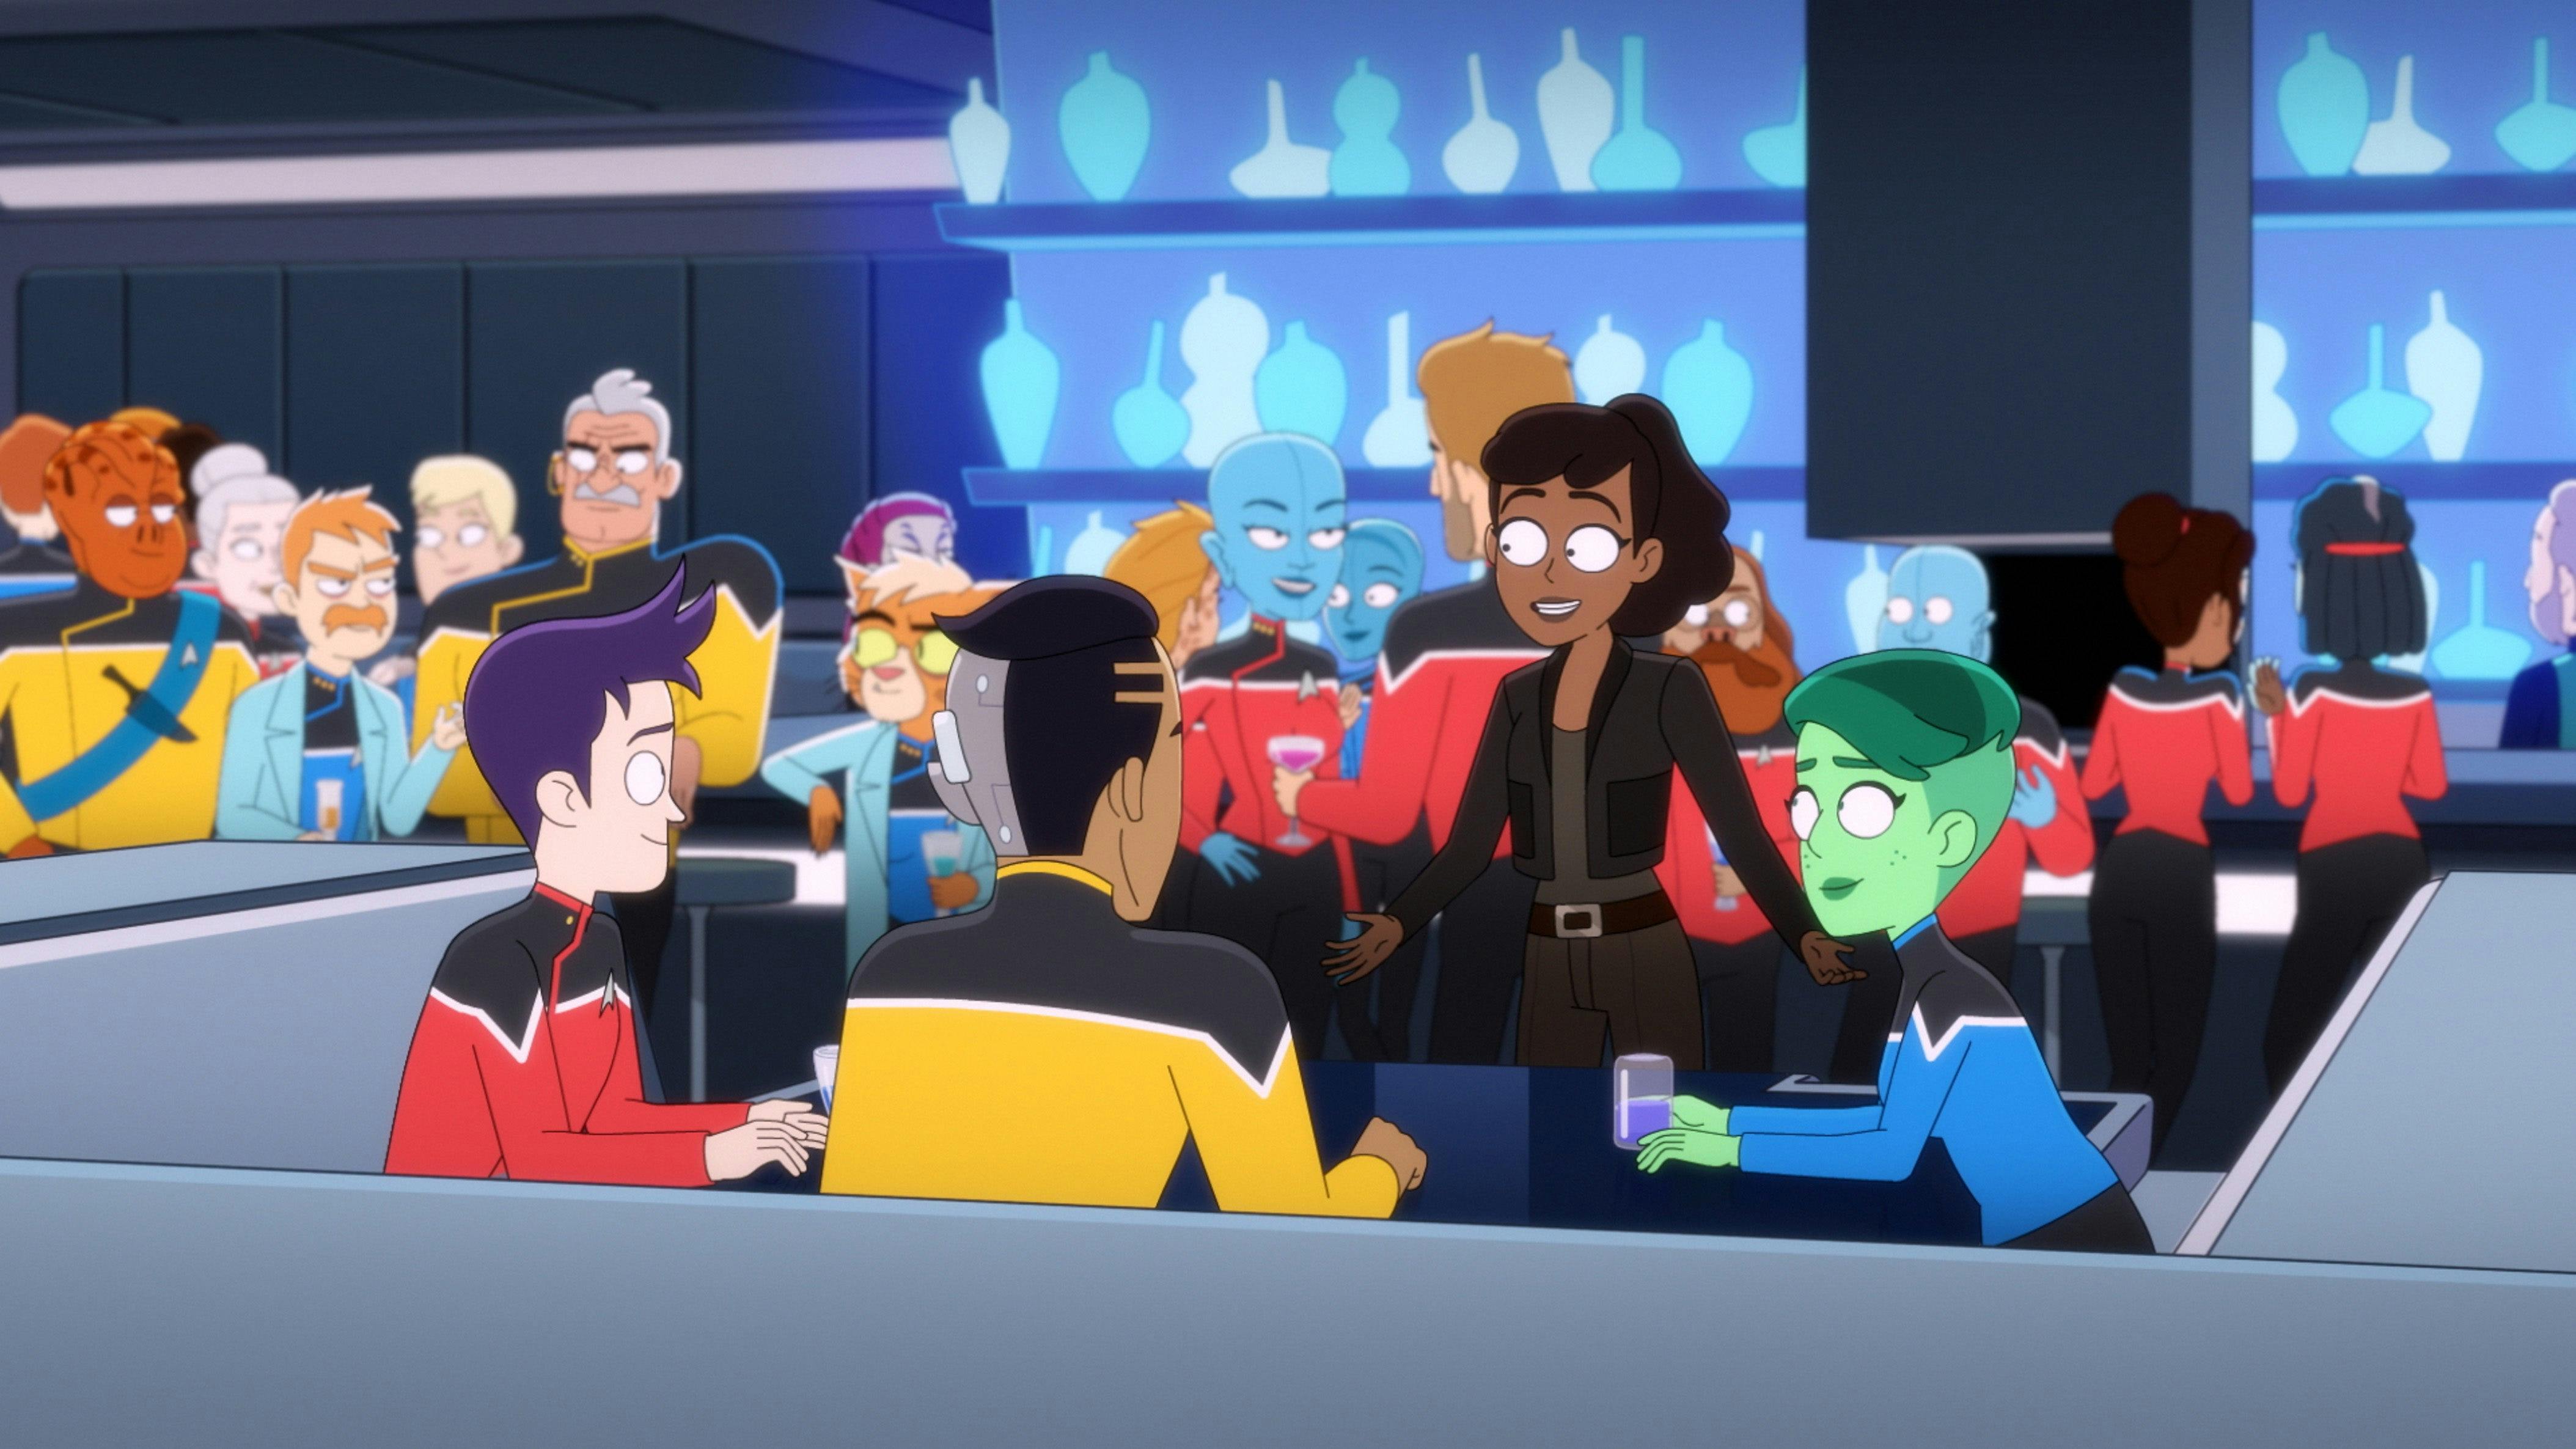 Mariner reunites with her friends in the Cerritos mess hall that's full of Cali-class crews celebrate on Star Trek: Lower Decks